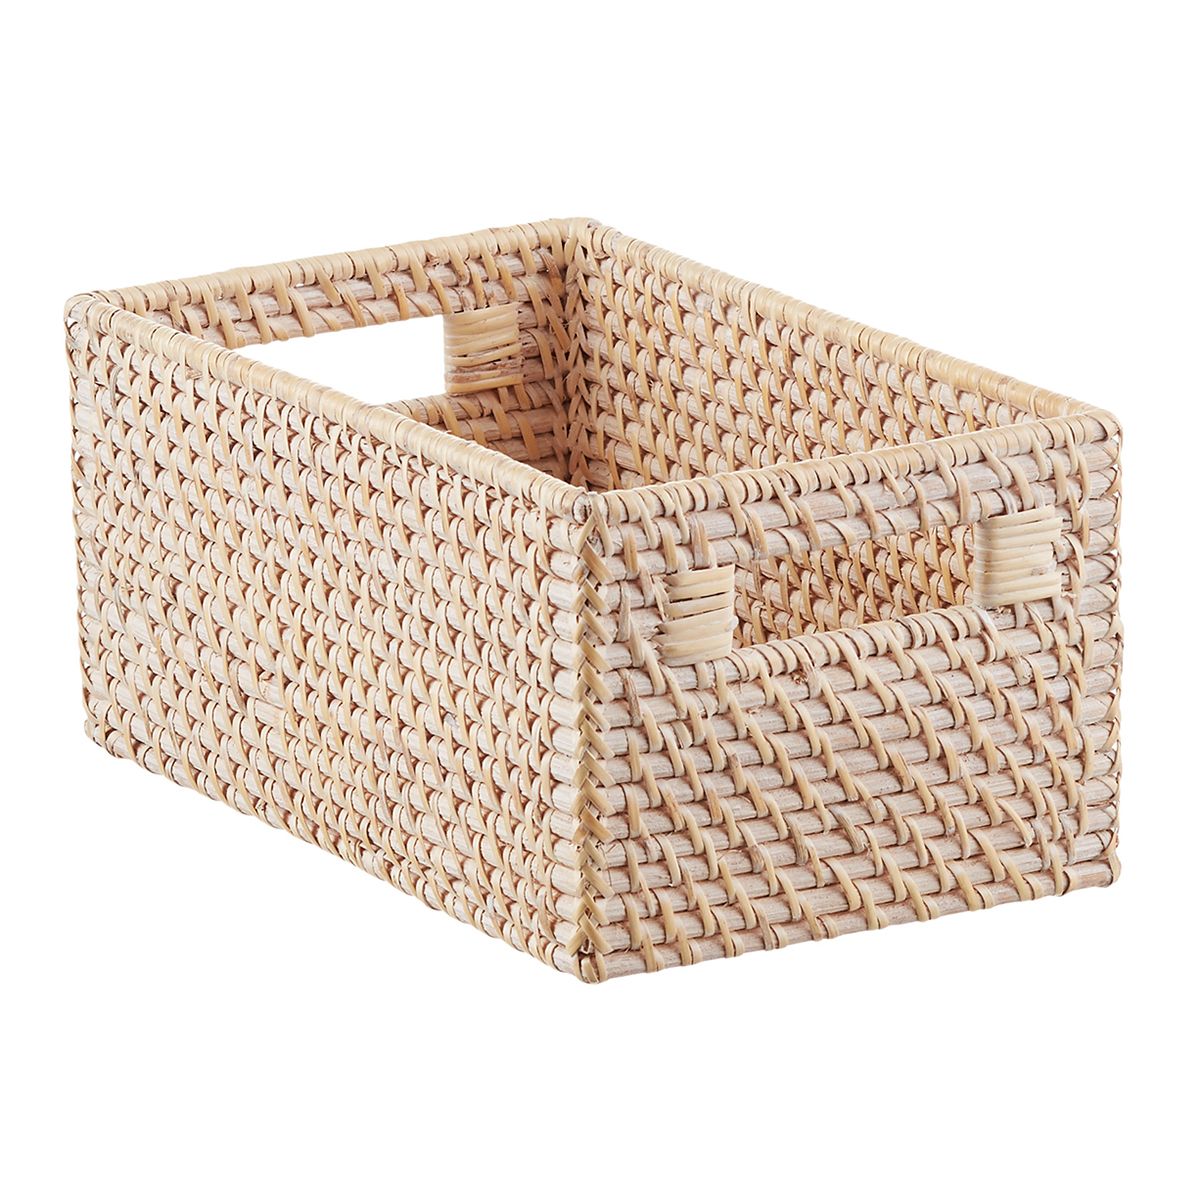 Rattan Bin w/ Handle | The Container Store